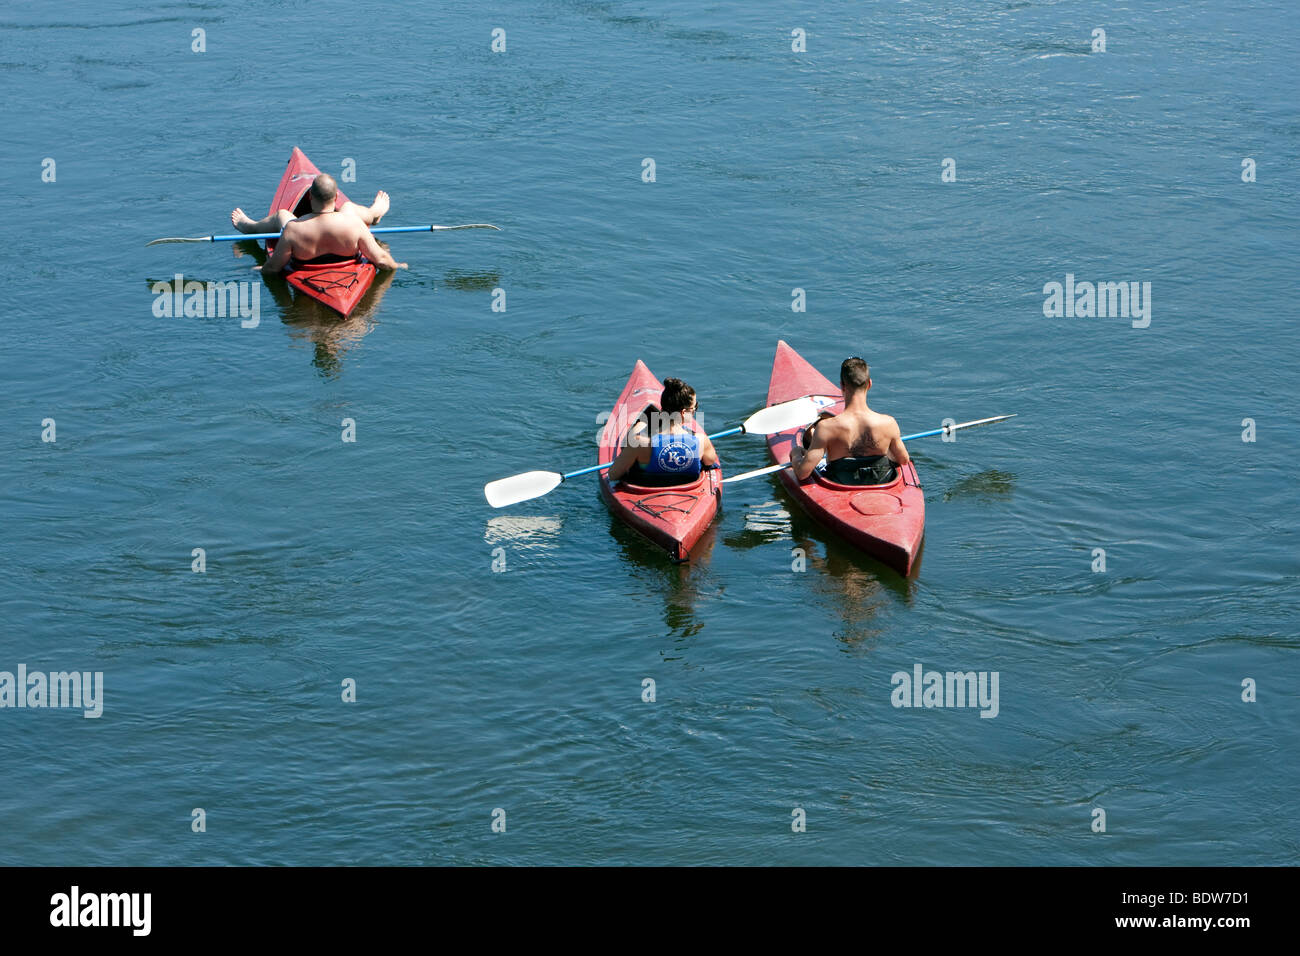 Delaware River New York High Resolution Stock Photography and Images - Alamy